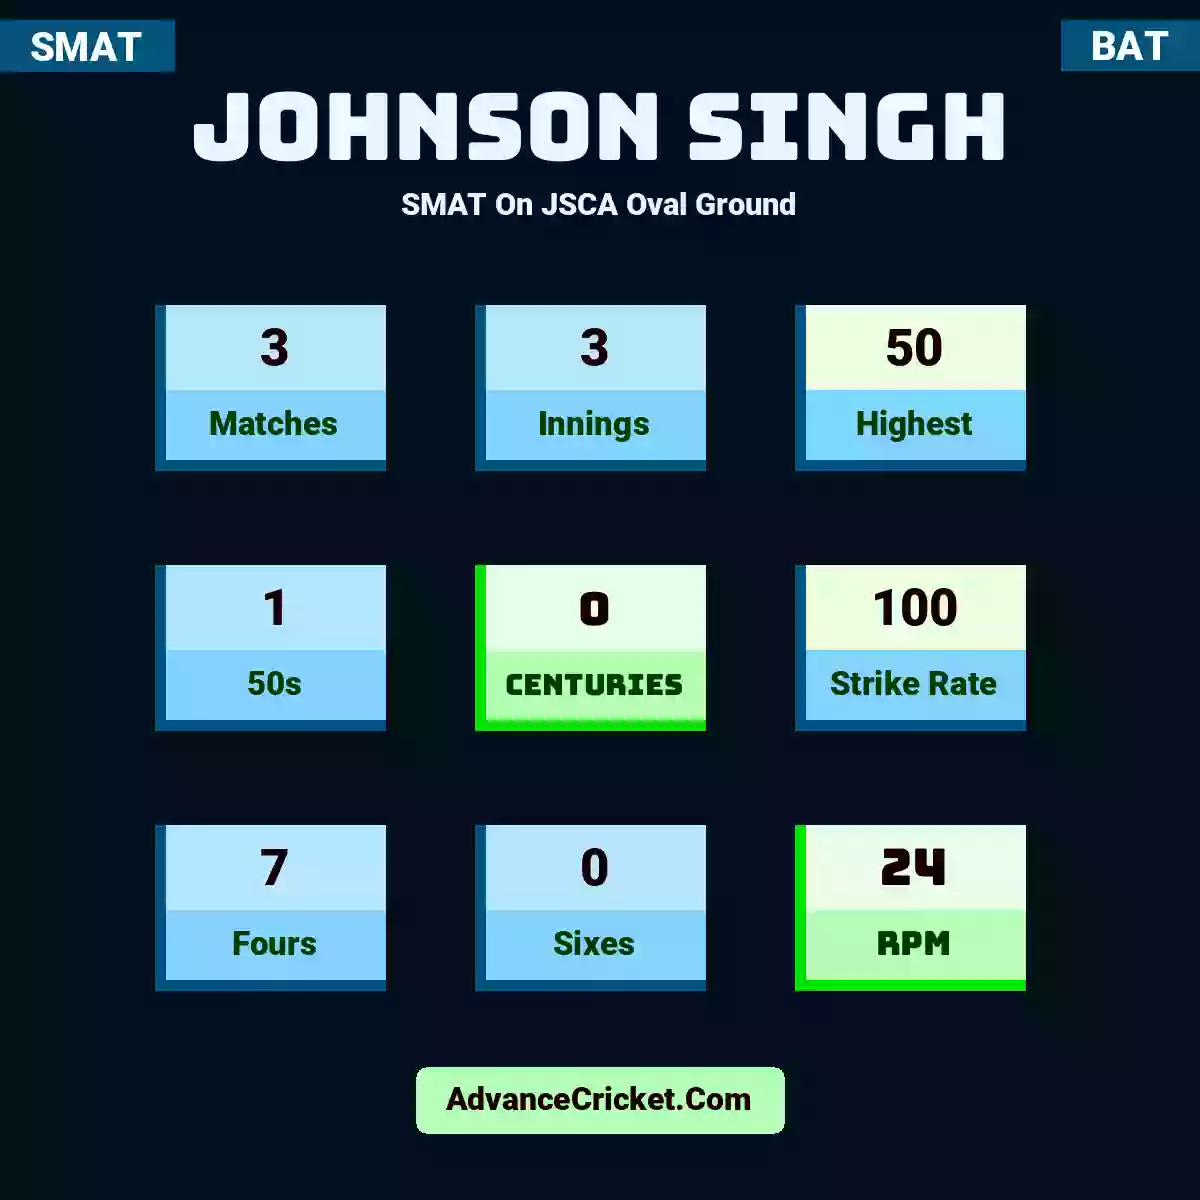 Johnson Singh SMAT  On JSCA Oval Ground, Johnson Singh played 3 matches, scored 50 runs as highest, 1 half-centuries, and 0 centuries, with a strike rate of 100. J.Singh hit 7 fours and 0 sixes, with an RPM of 24.